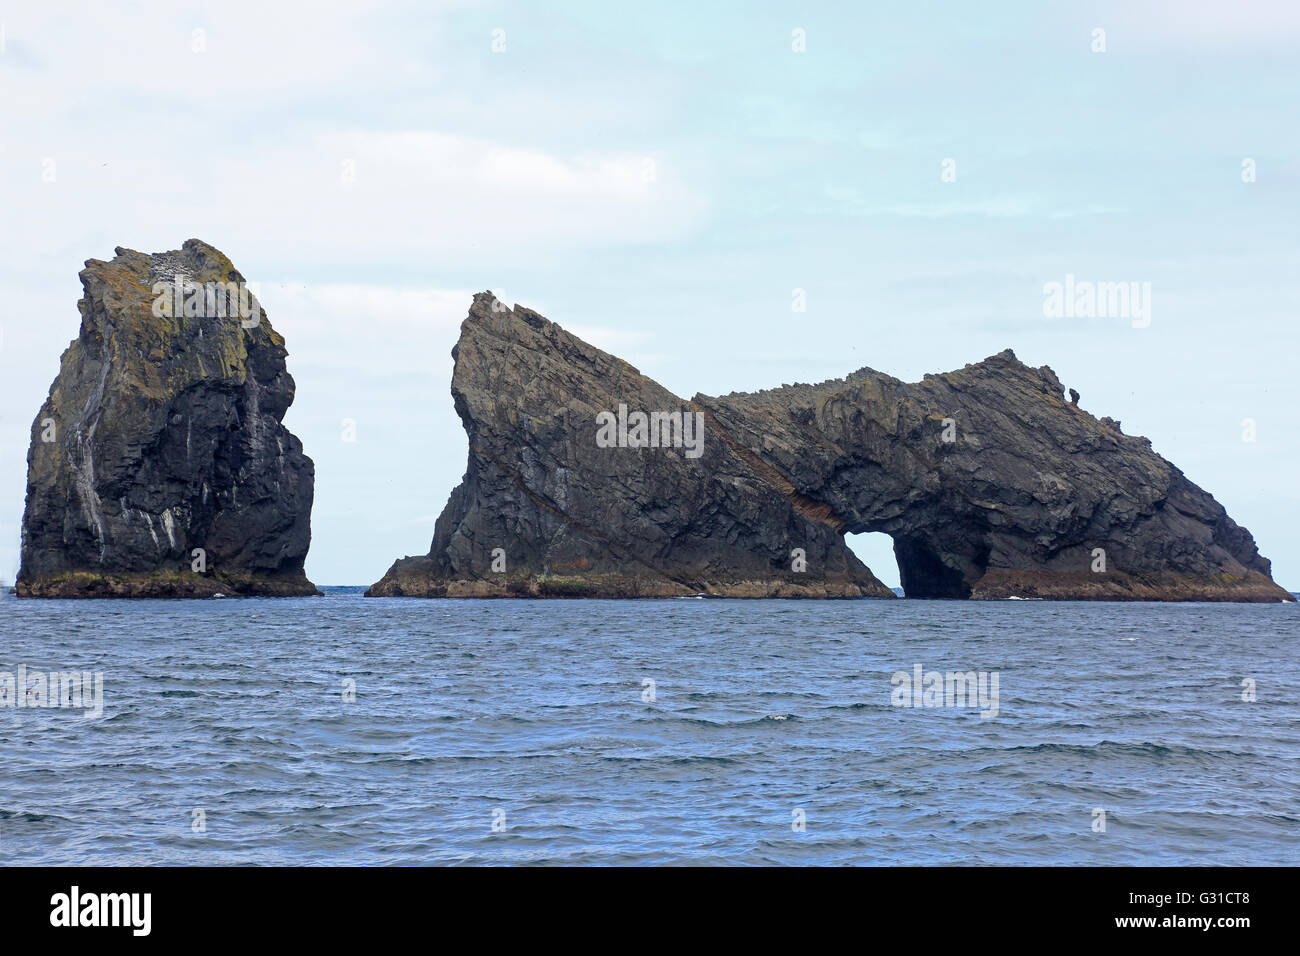 Sea stack between Soay and Hirta at St Kilda taken from the sea Stock Photo